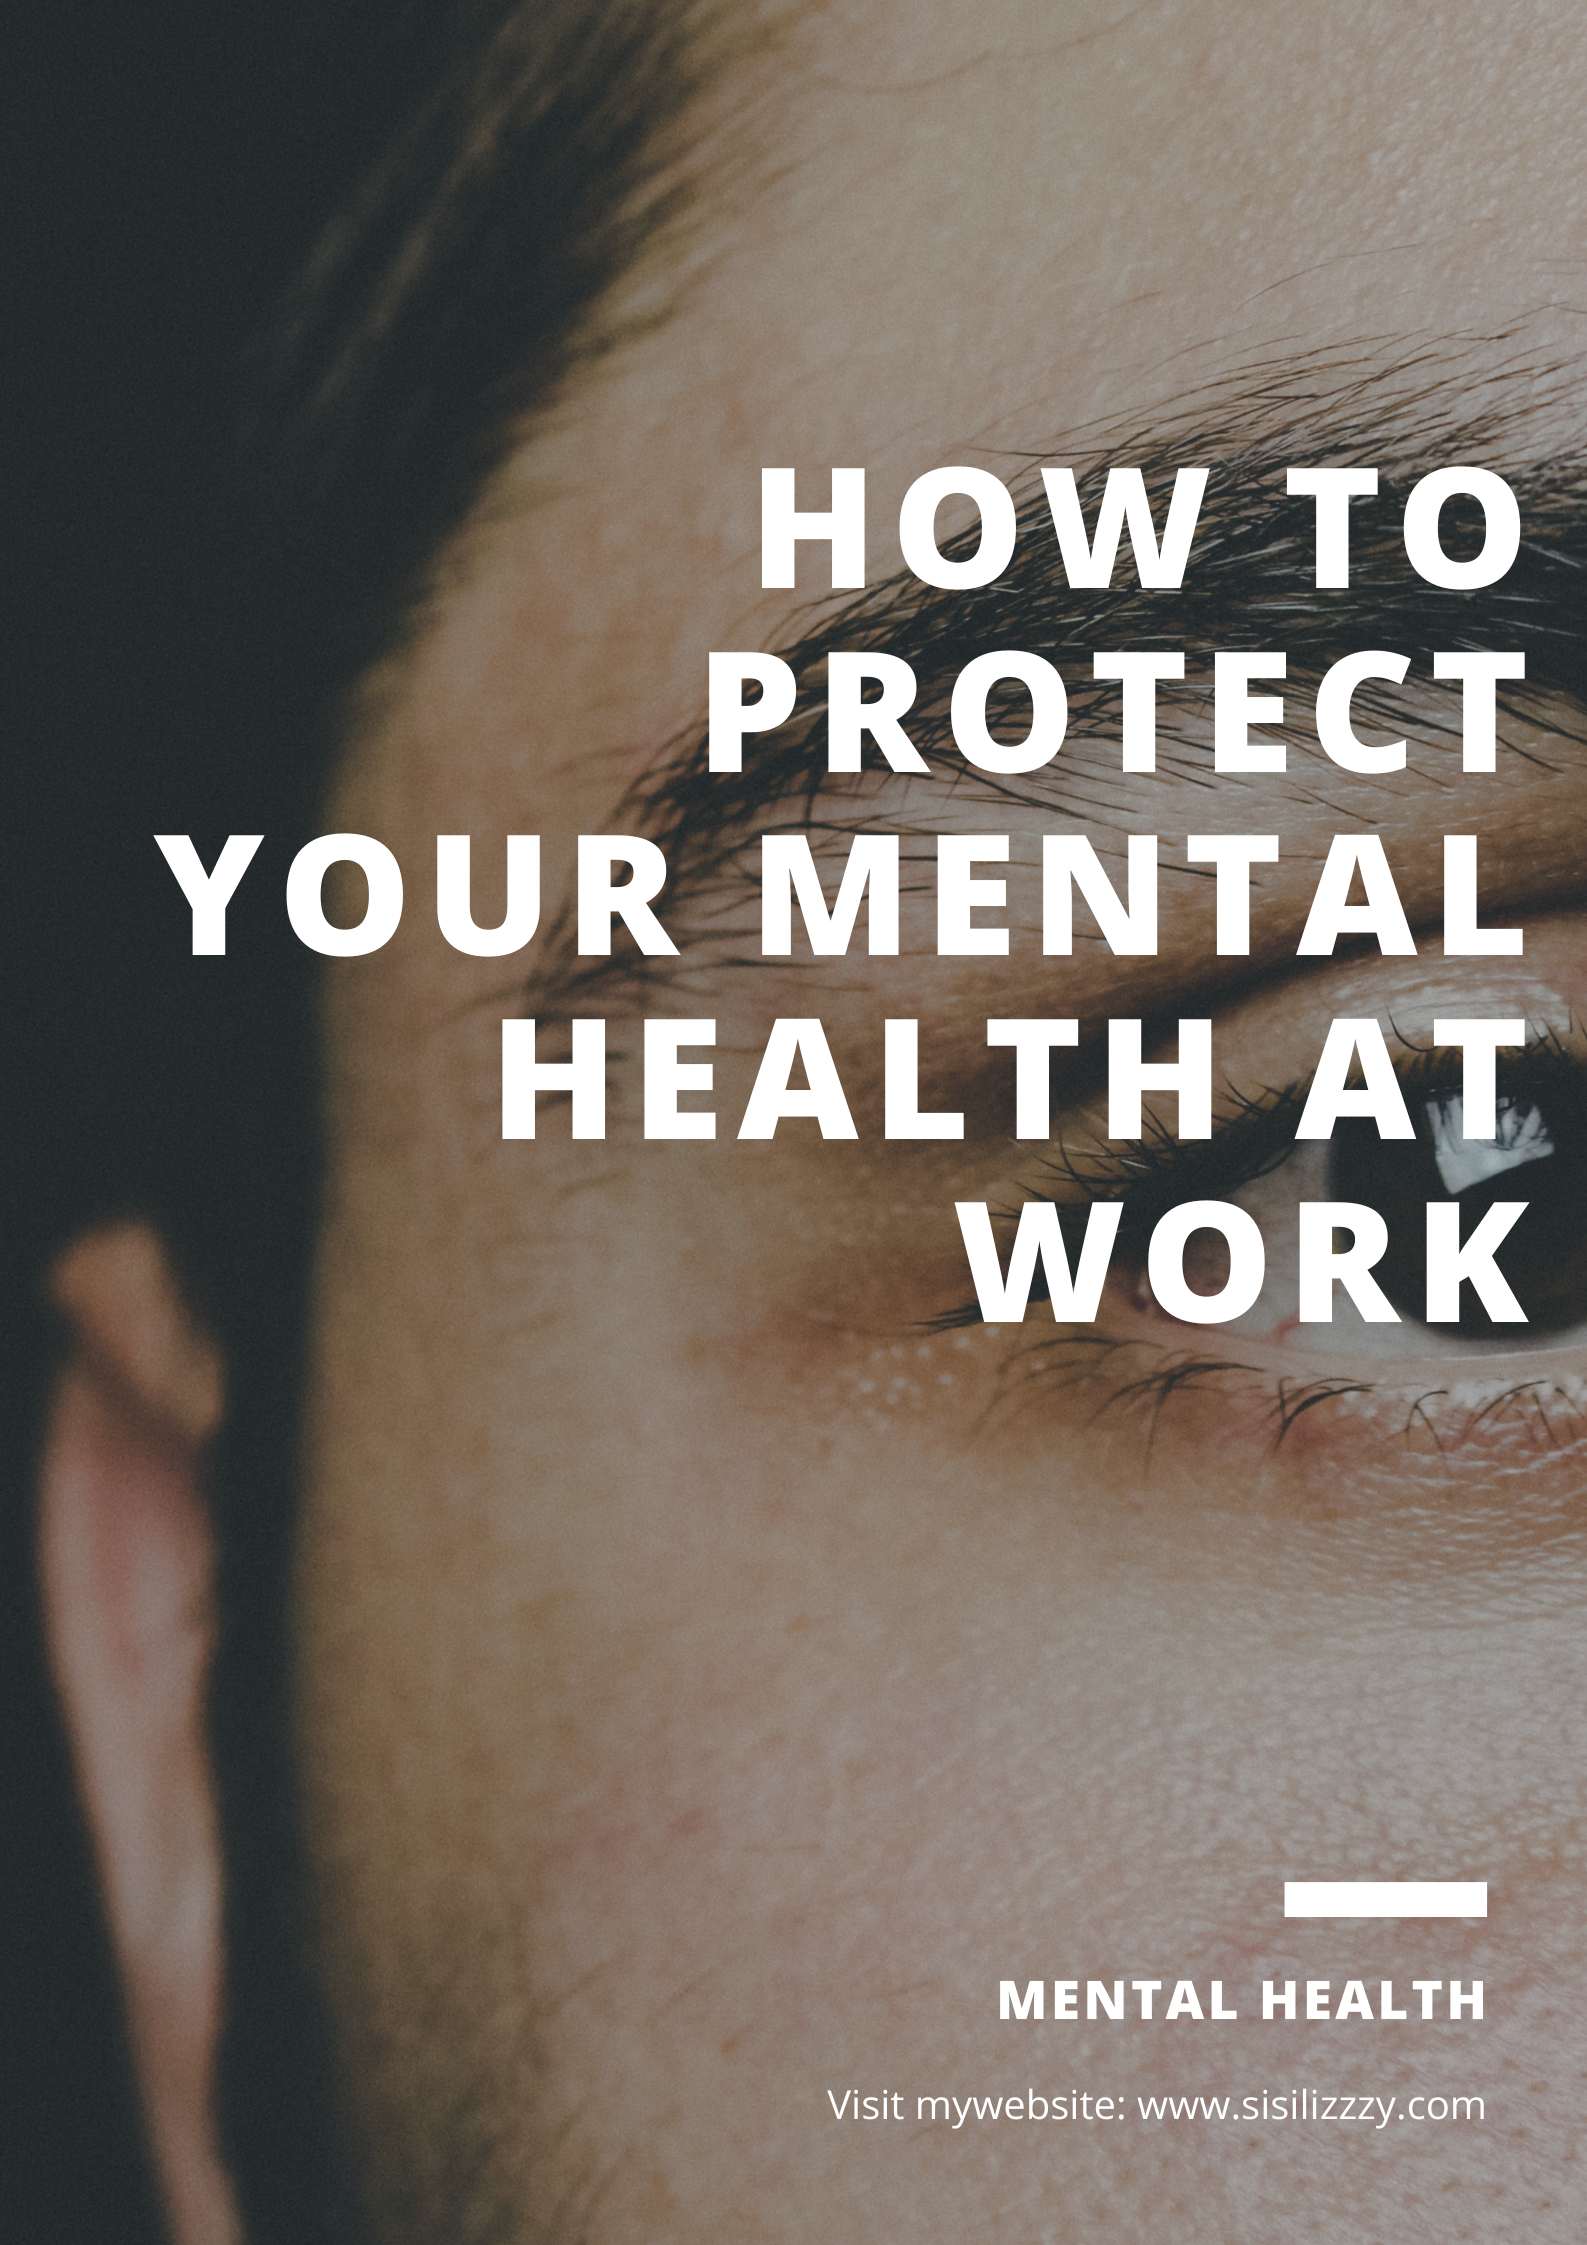 How to protect your mental health at work, Number 3 is very important